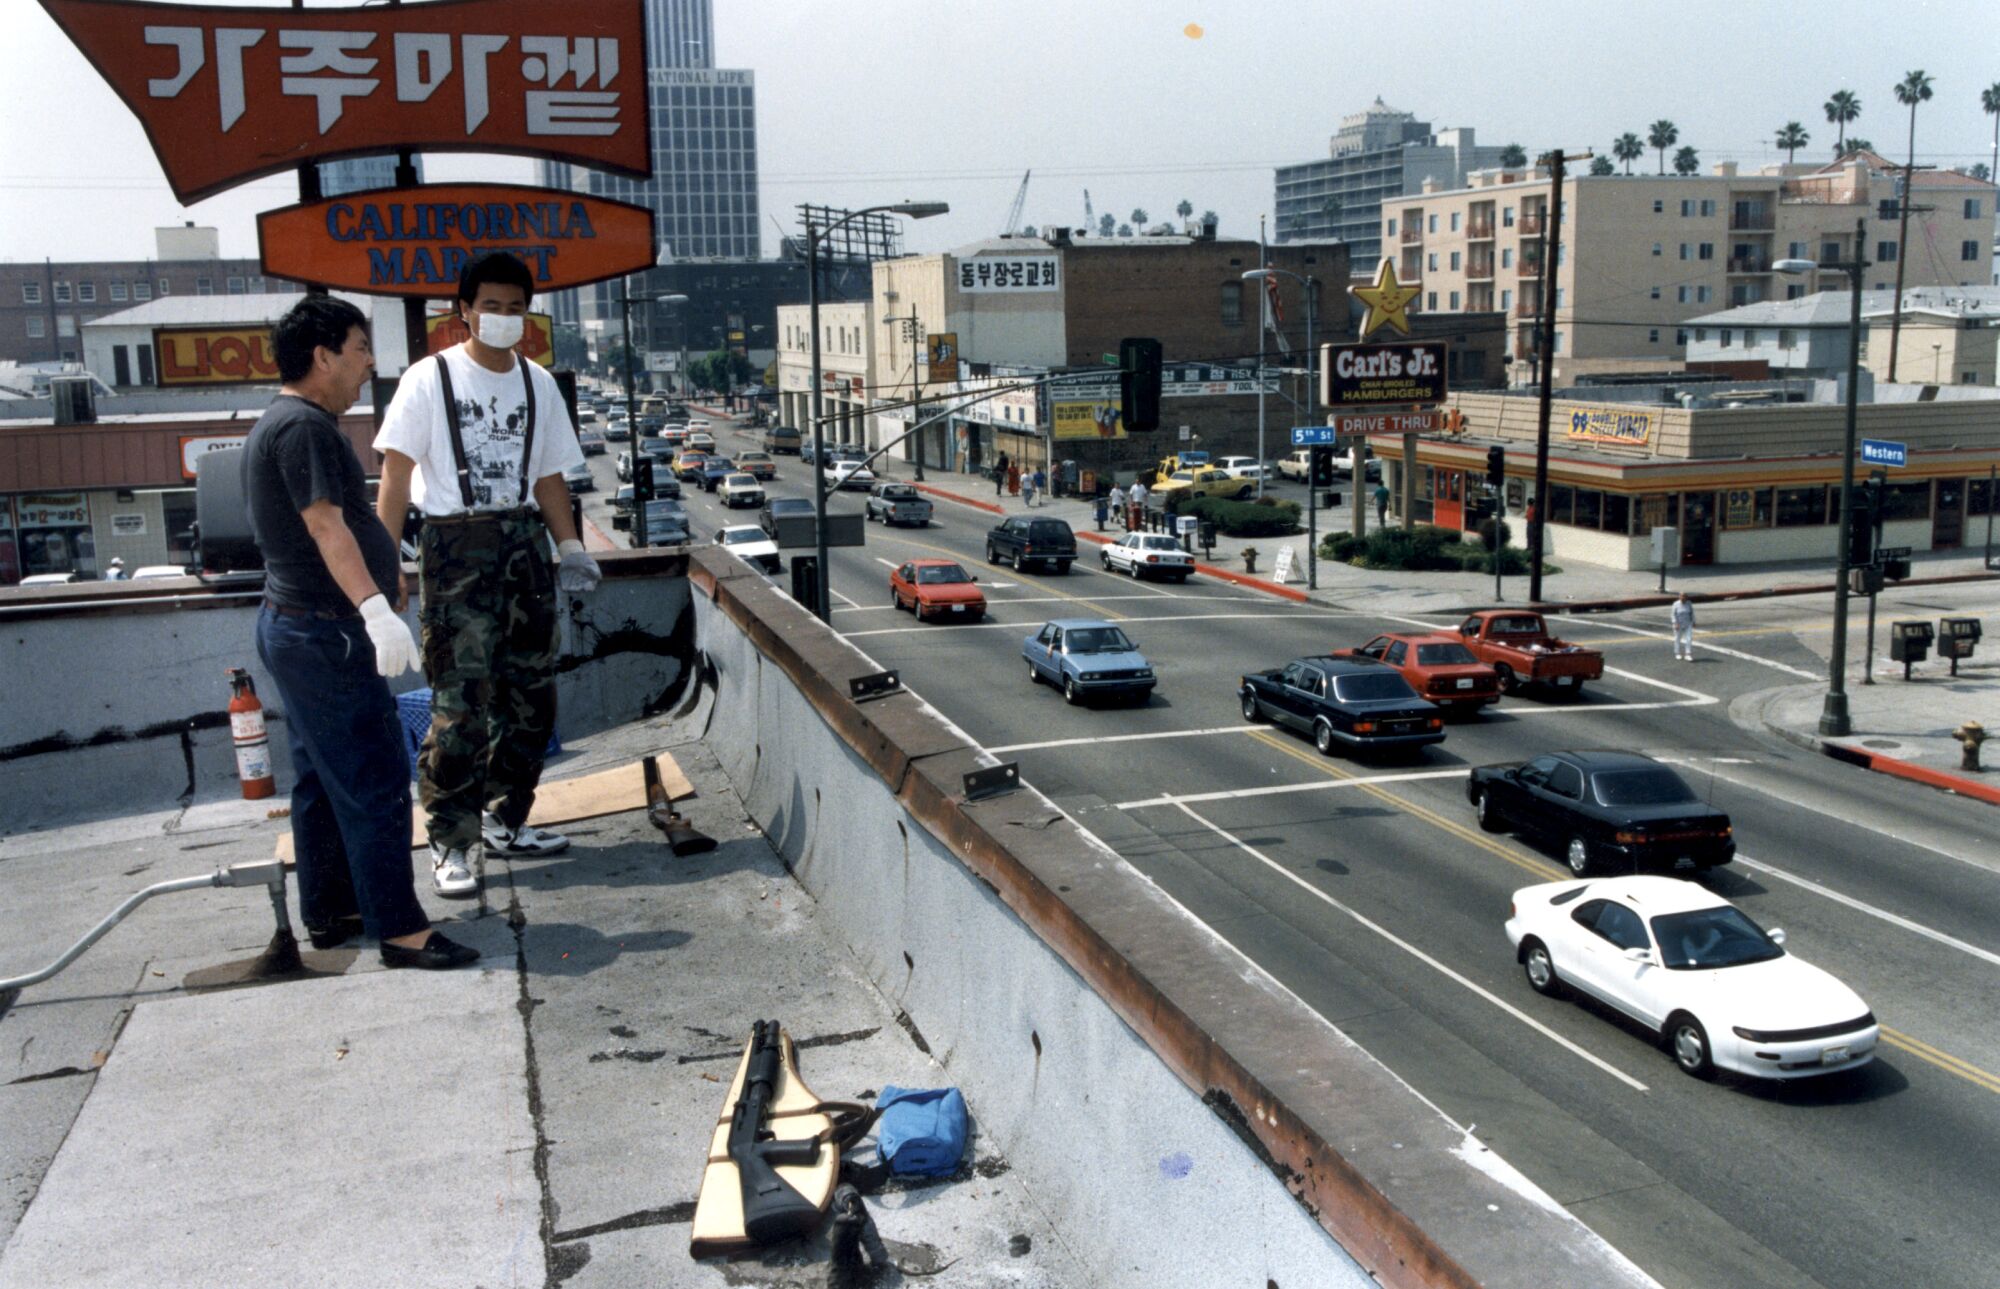 Thirty years after it burned, Koreatown has transformed. But scars